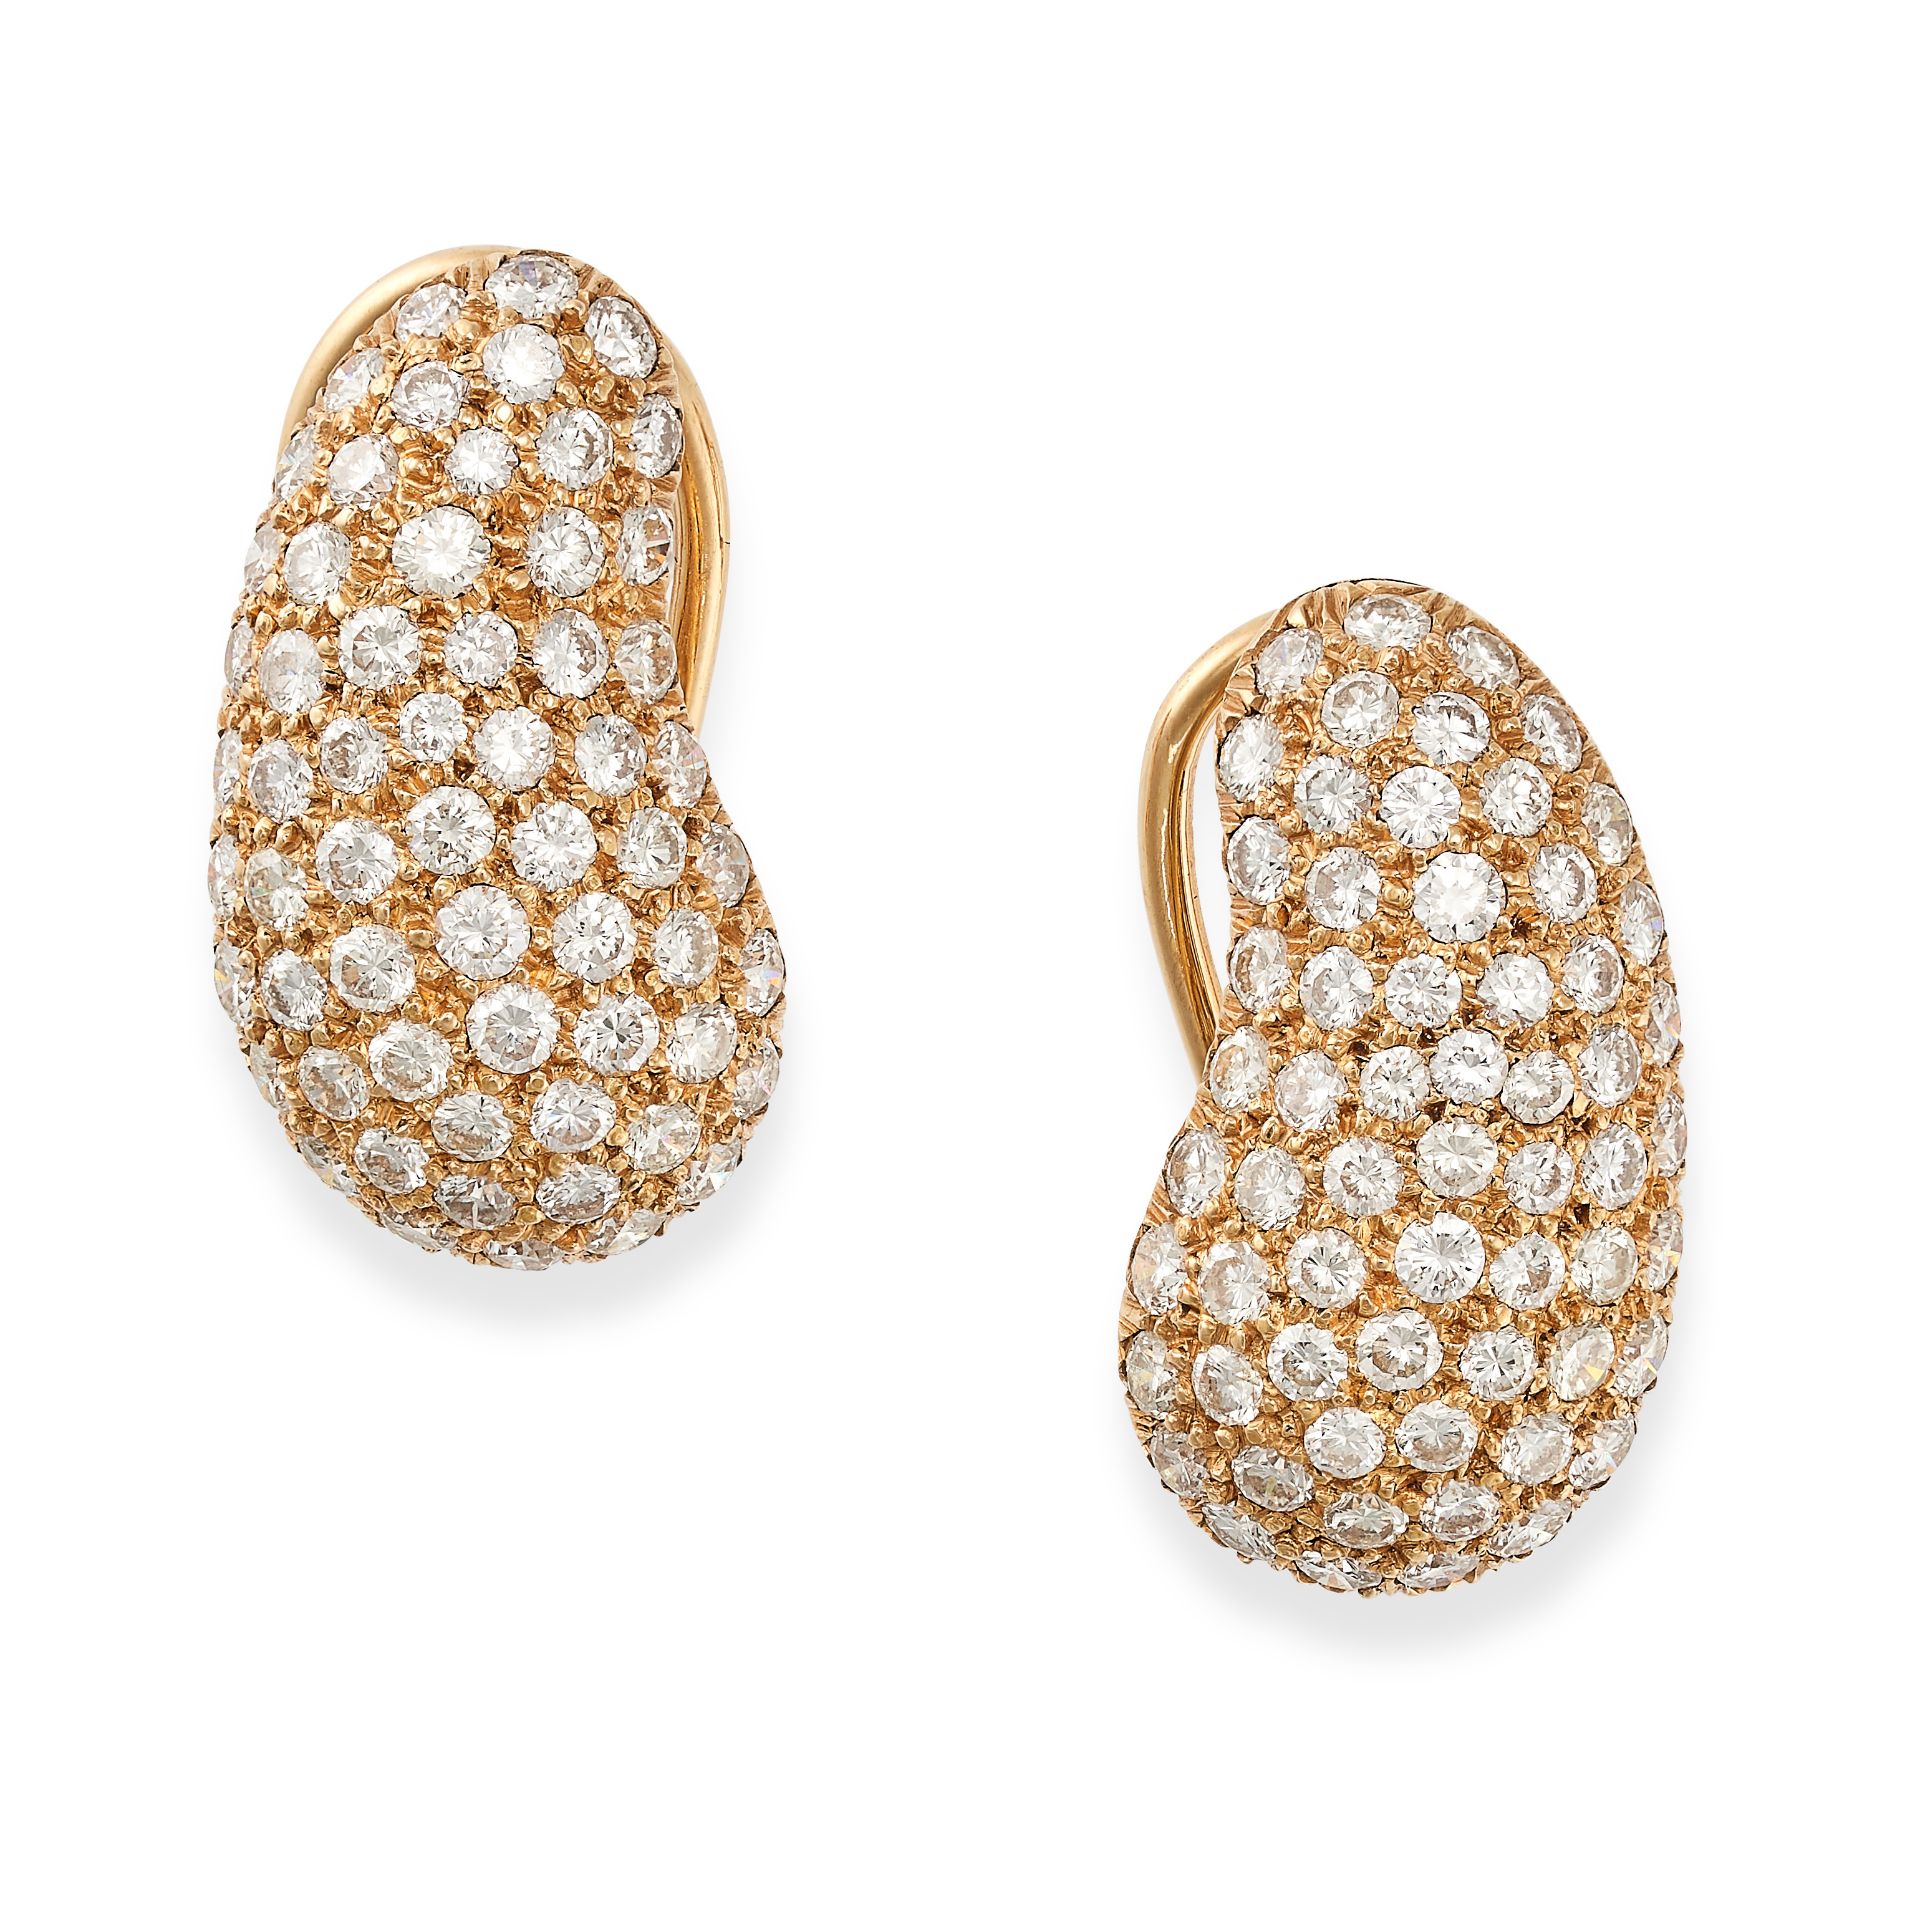 A PAIR OF VINTAGE DIAMOND BEAN EARRINGS, CIRCA 1990 in yellow gold, designed as beans, pave set w...